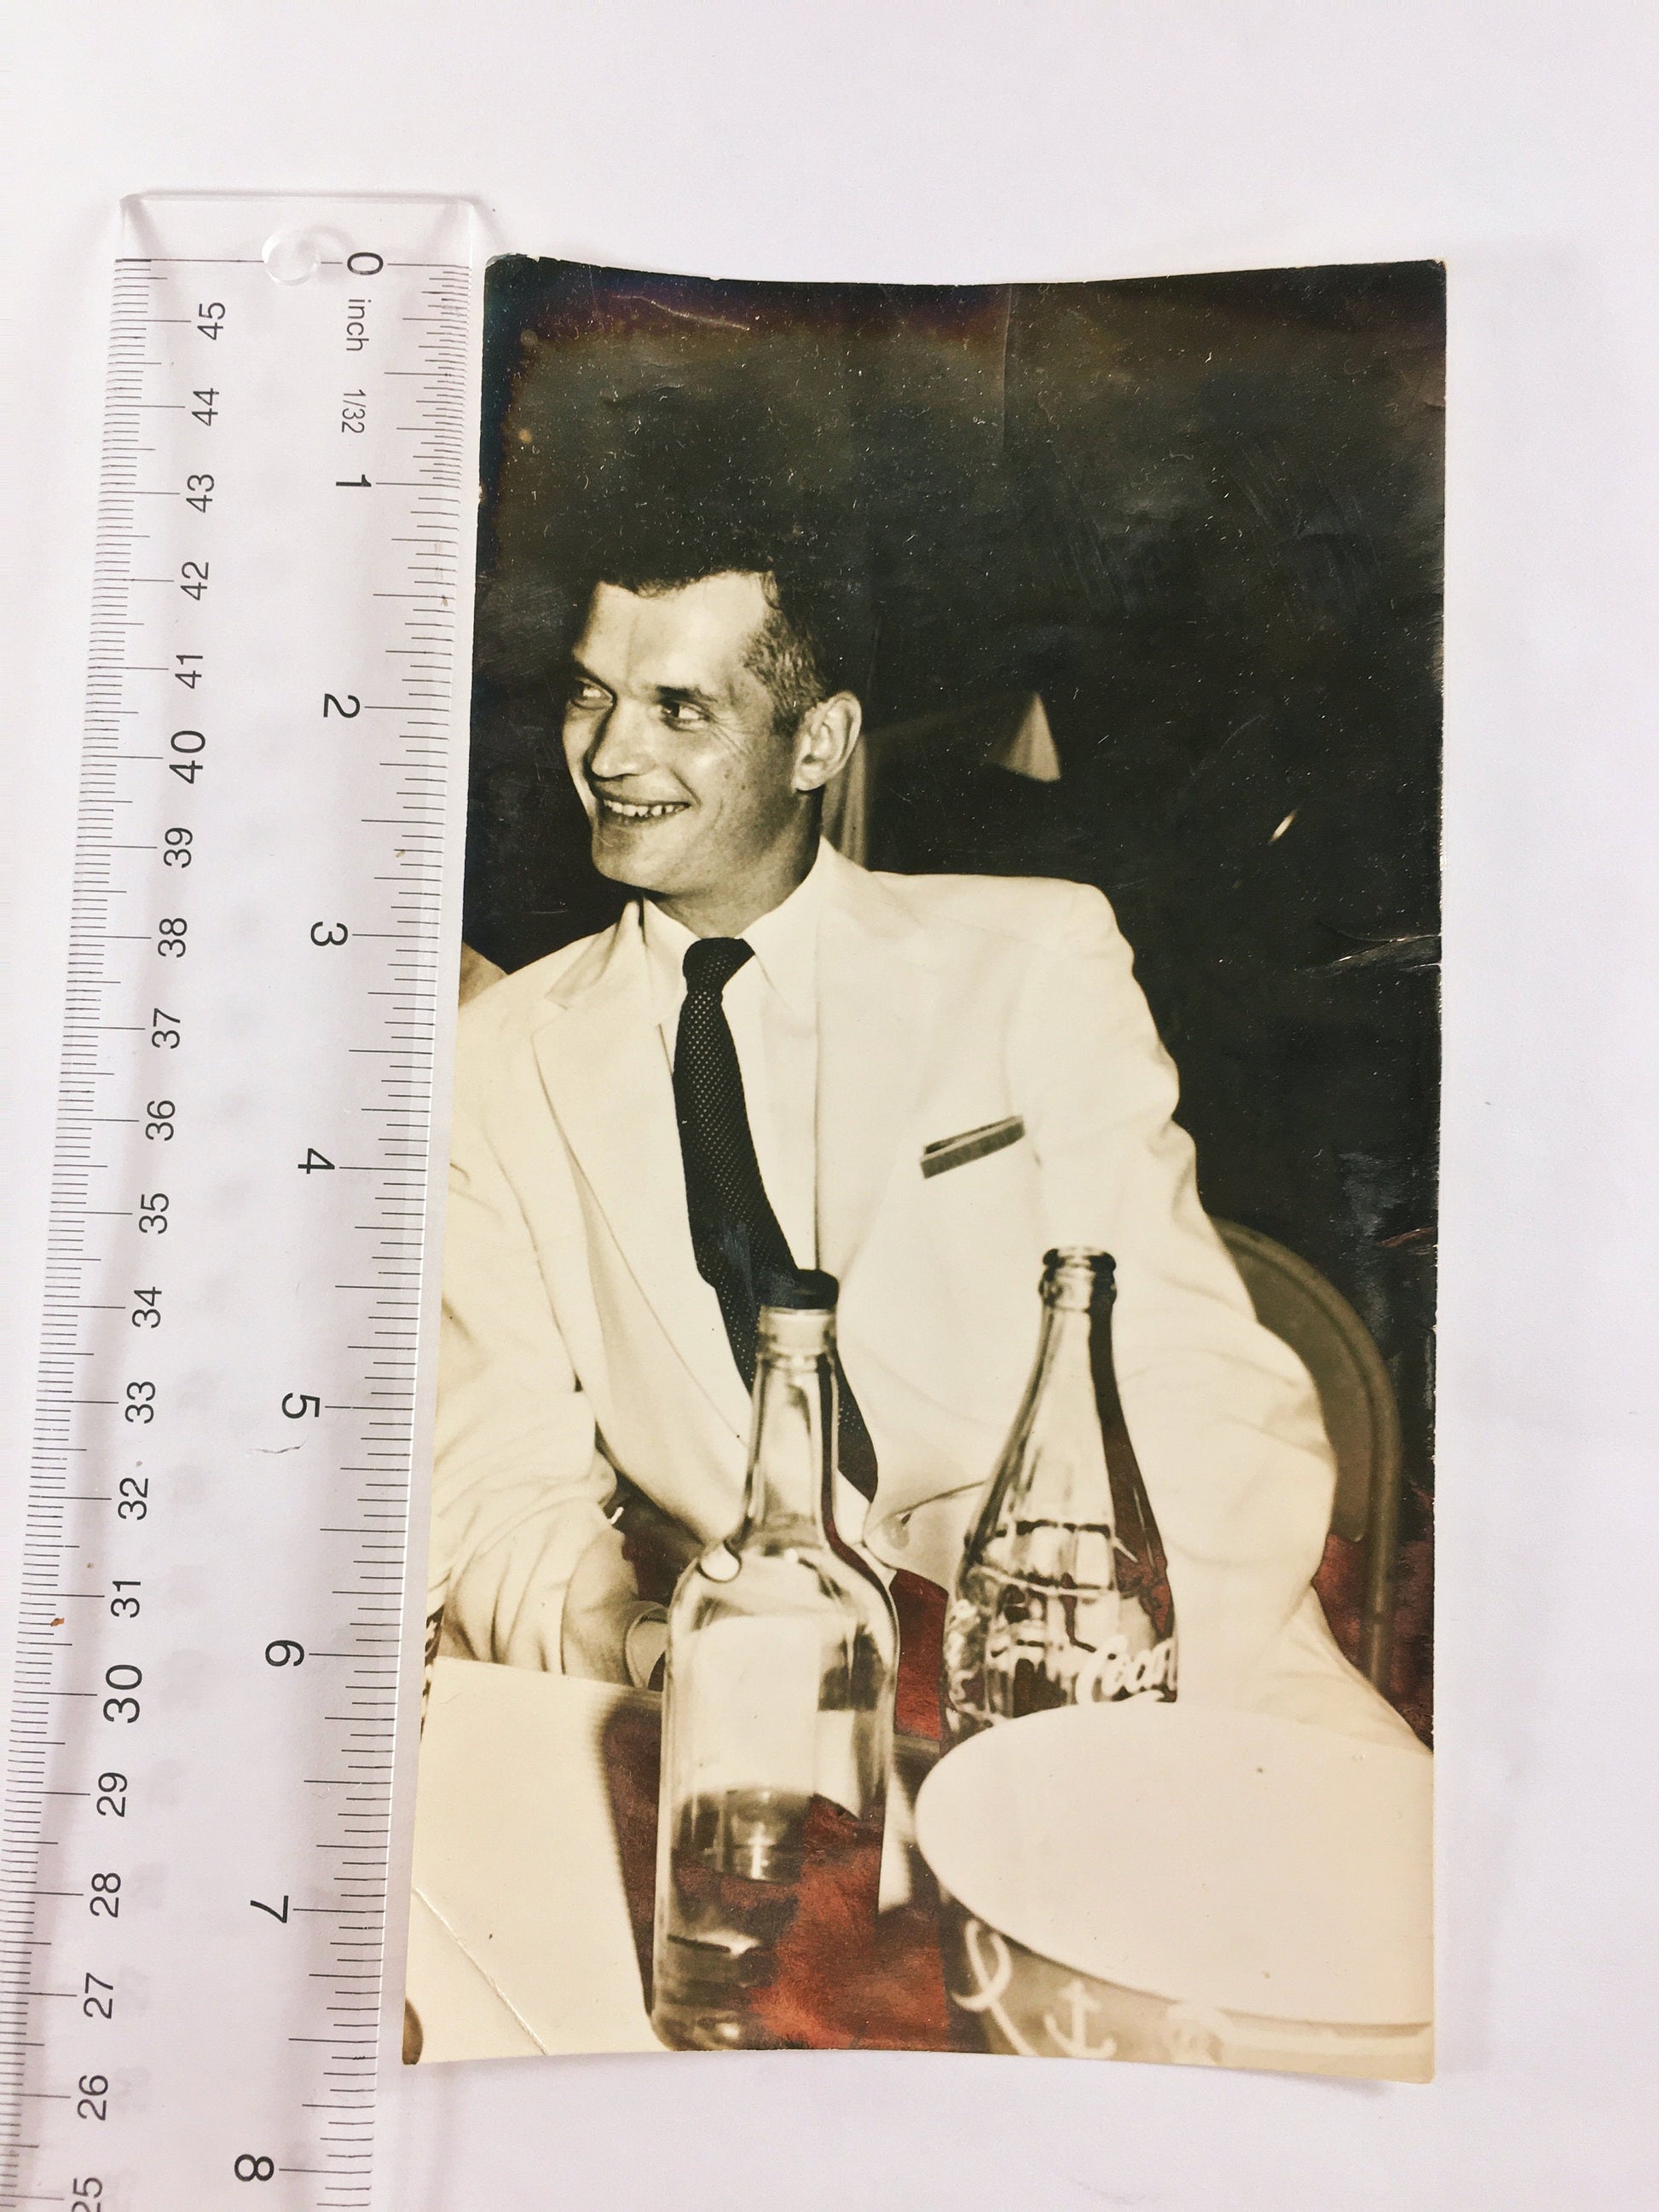 Vintage authentic photographs crica 1940s-1950s hunters, man in tuxedo with Coca-Cola bottle, school photo Jerusalem crypt postcard PICK ONE